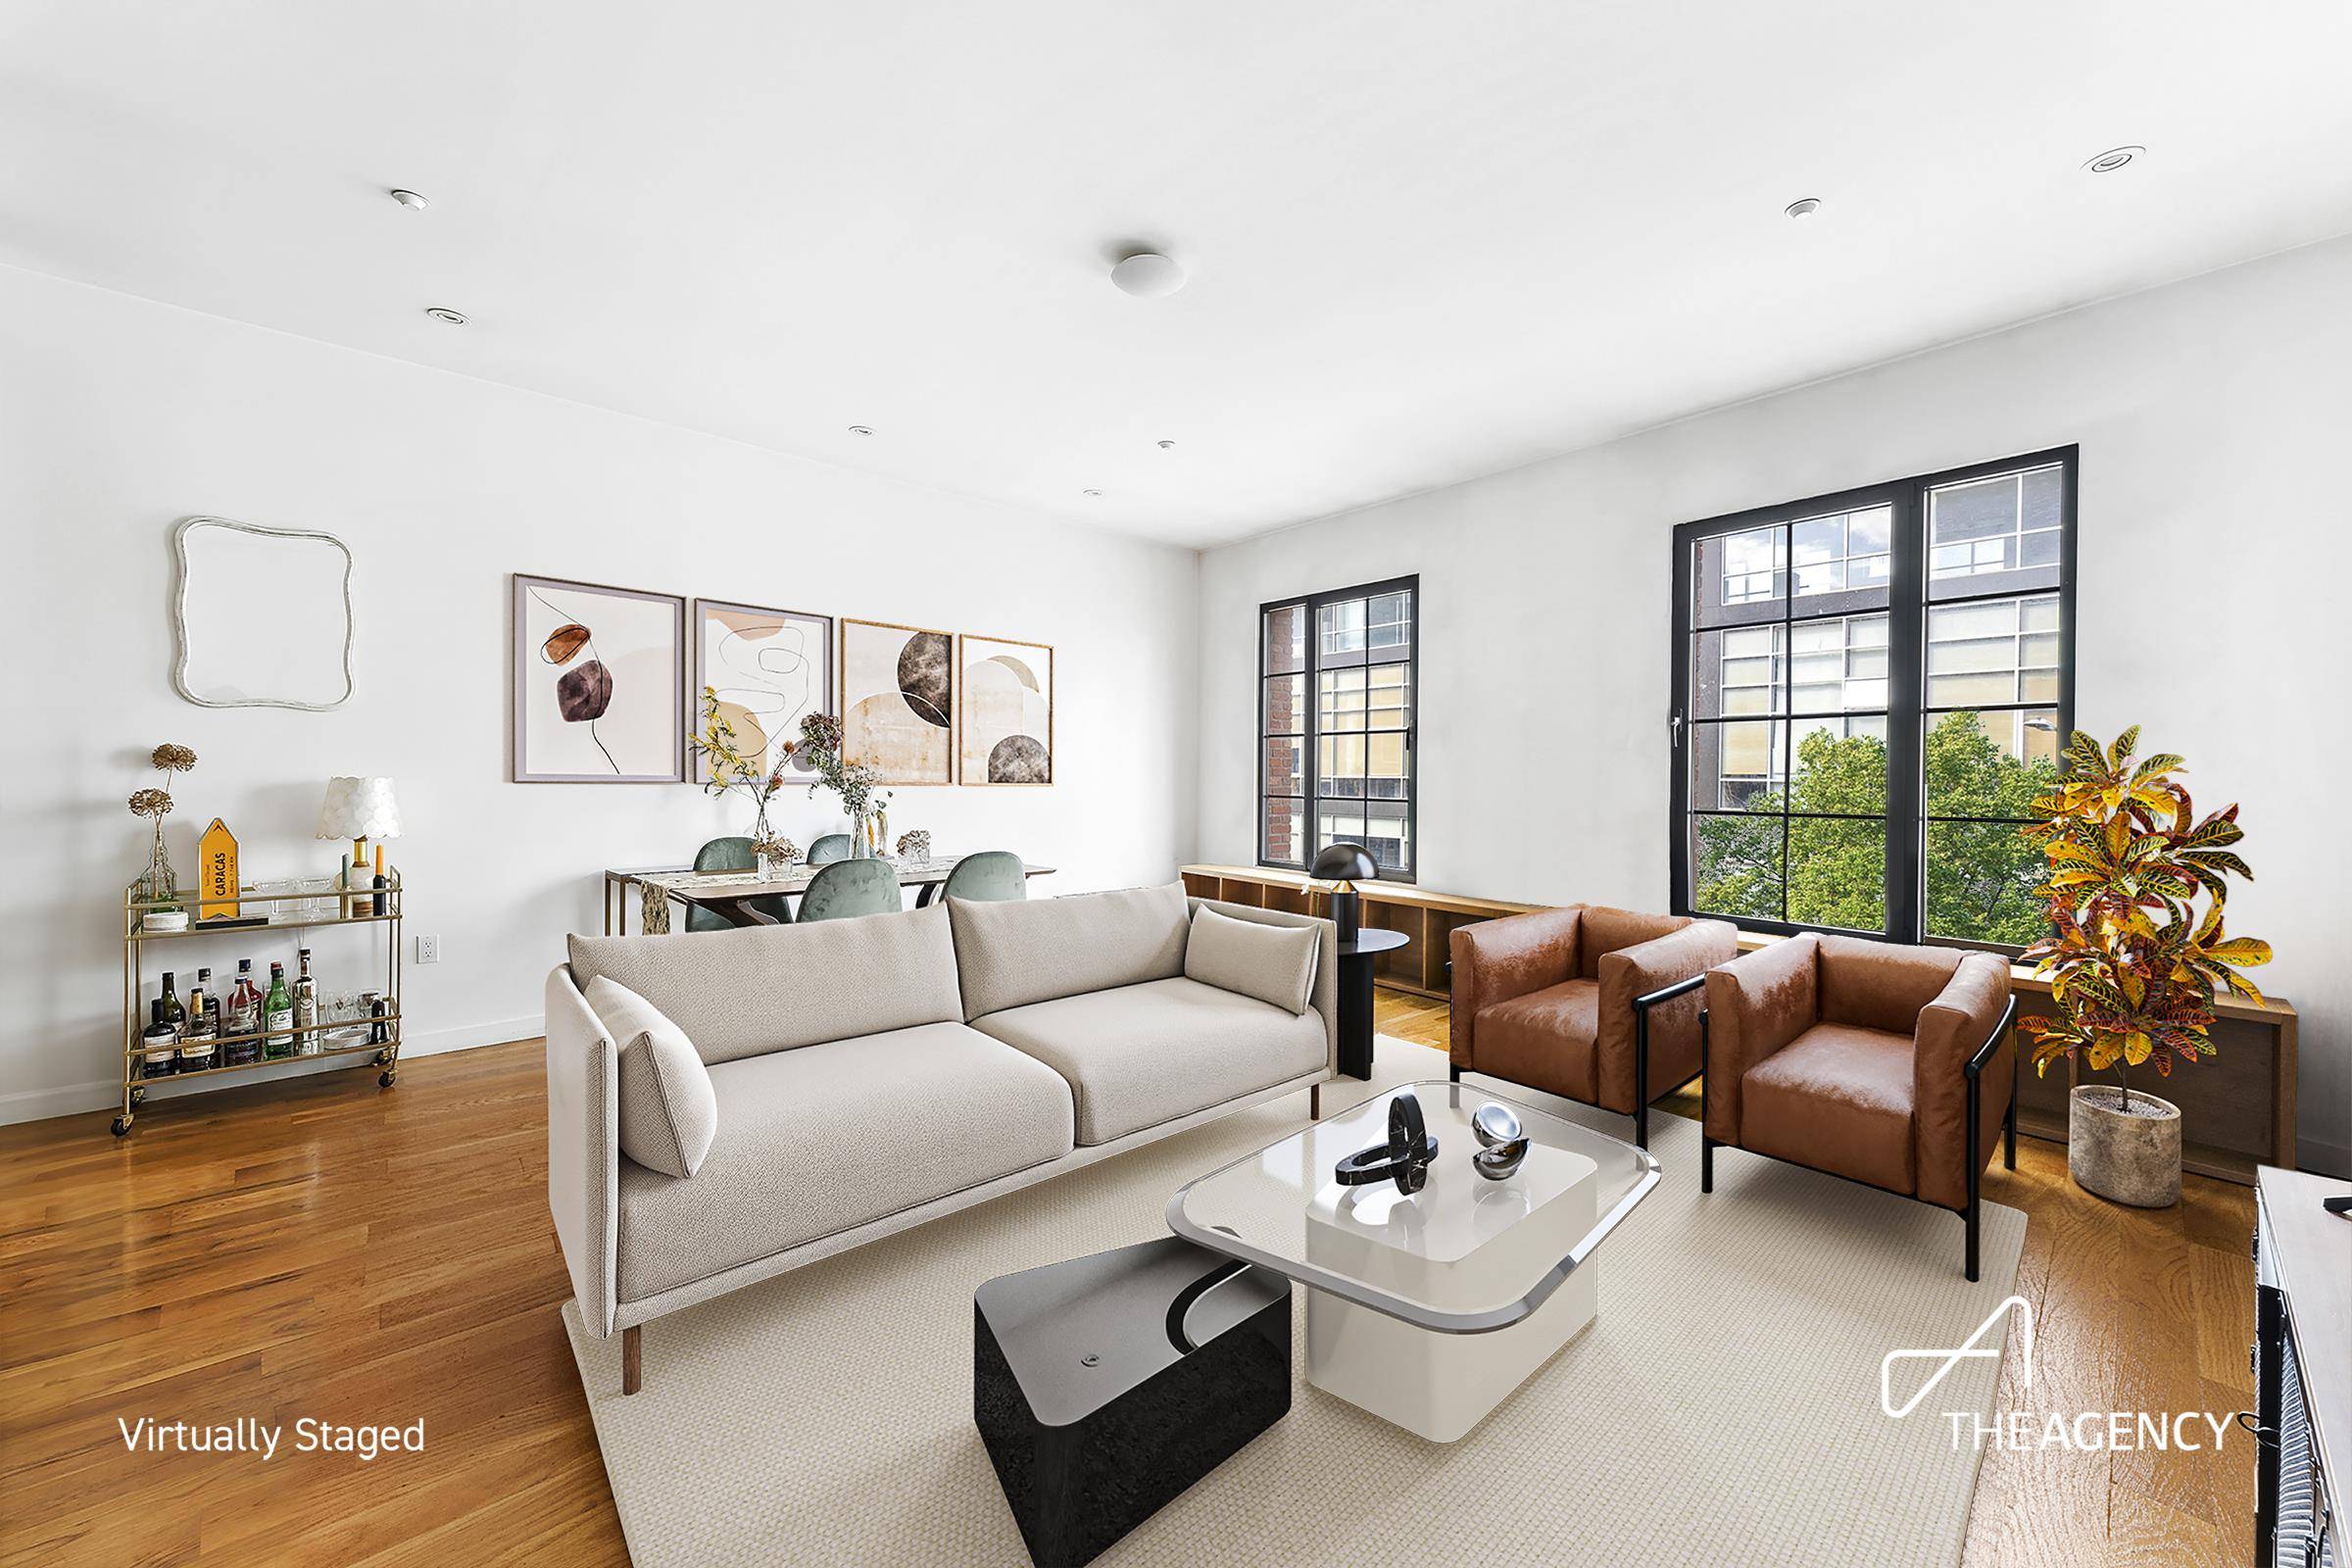 Nestled within the charming brick facade of a boutique 4 story condominium, 233 Kent Ave beckons with its distinctive allure.